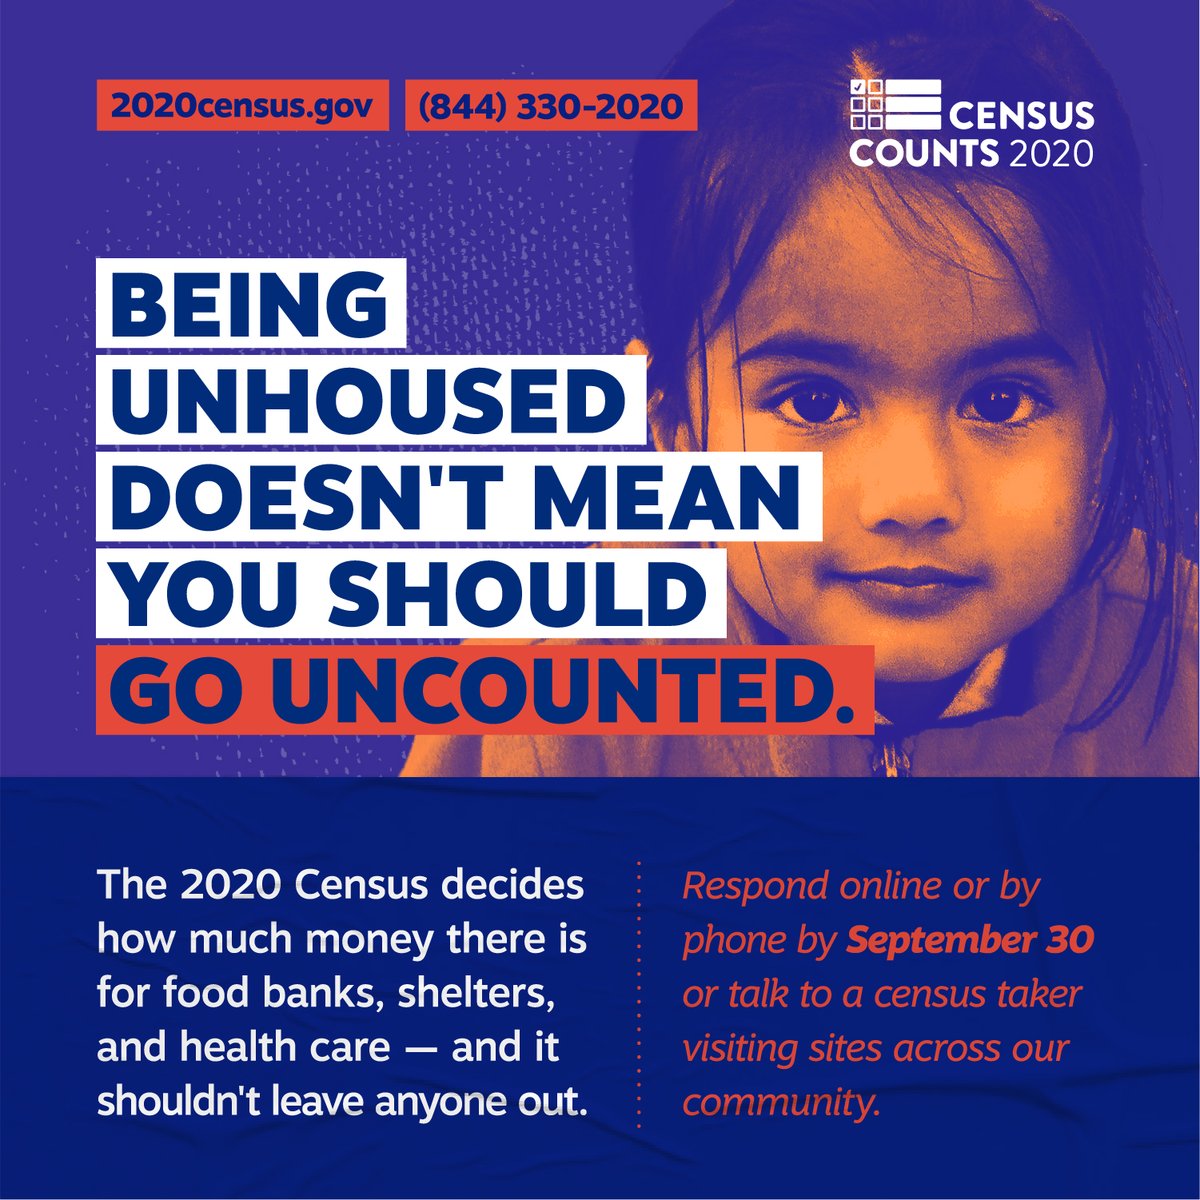 Some great #census2020 graphics from @civilrightsorg. Today is the 2nd day of Service-Based Enumeration! You can also respond online or by the phone by September 30. @CACompleteCount @CACensus @TheCoalitionSF